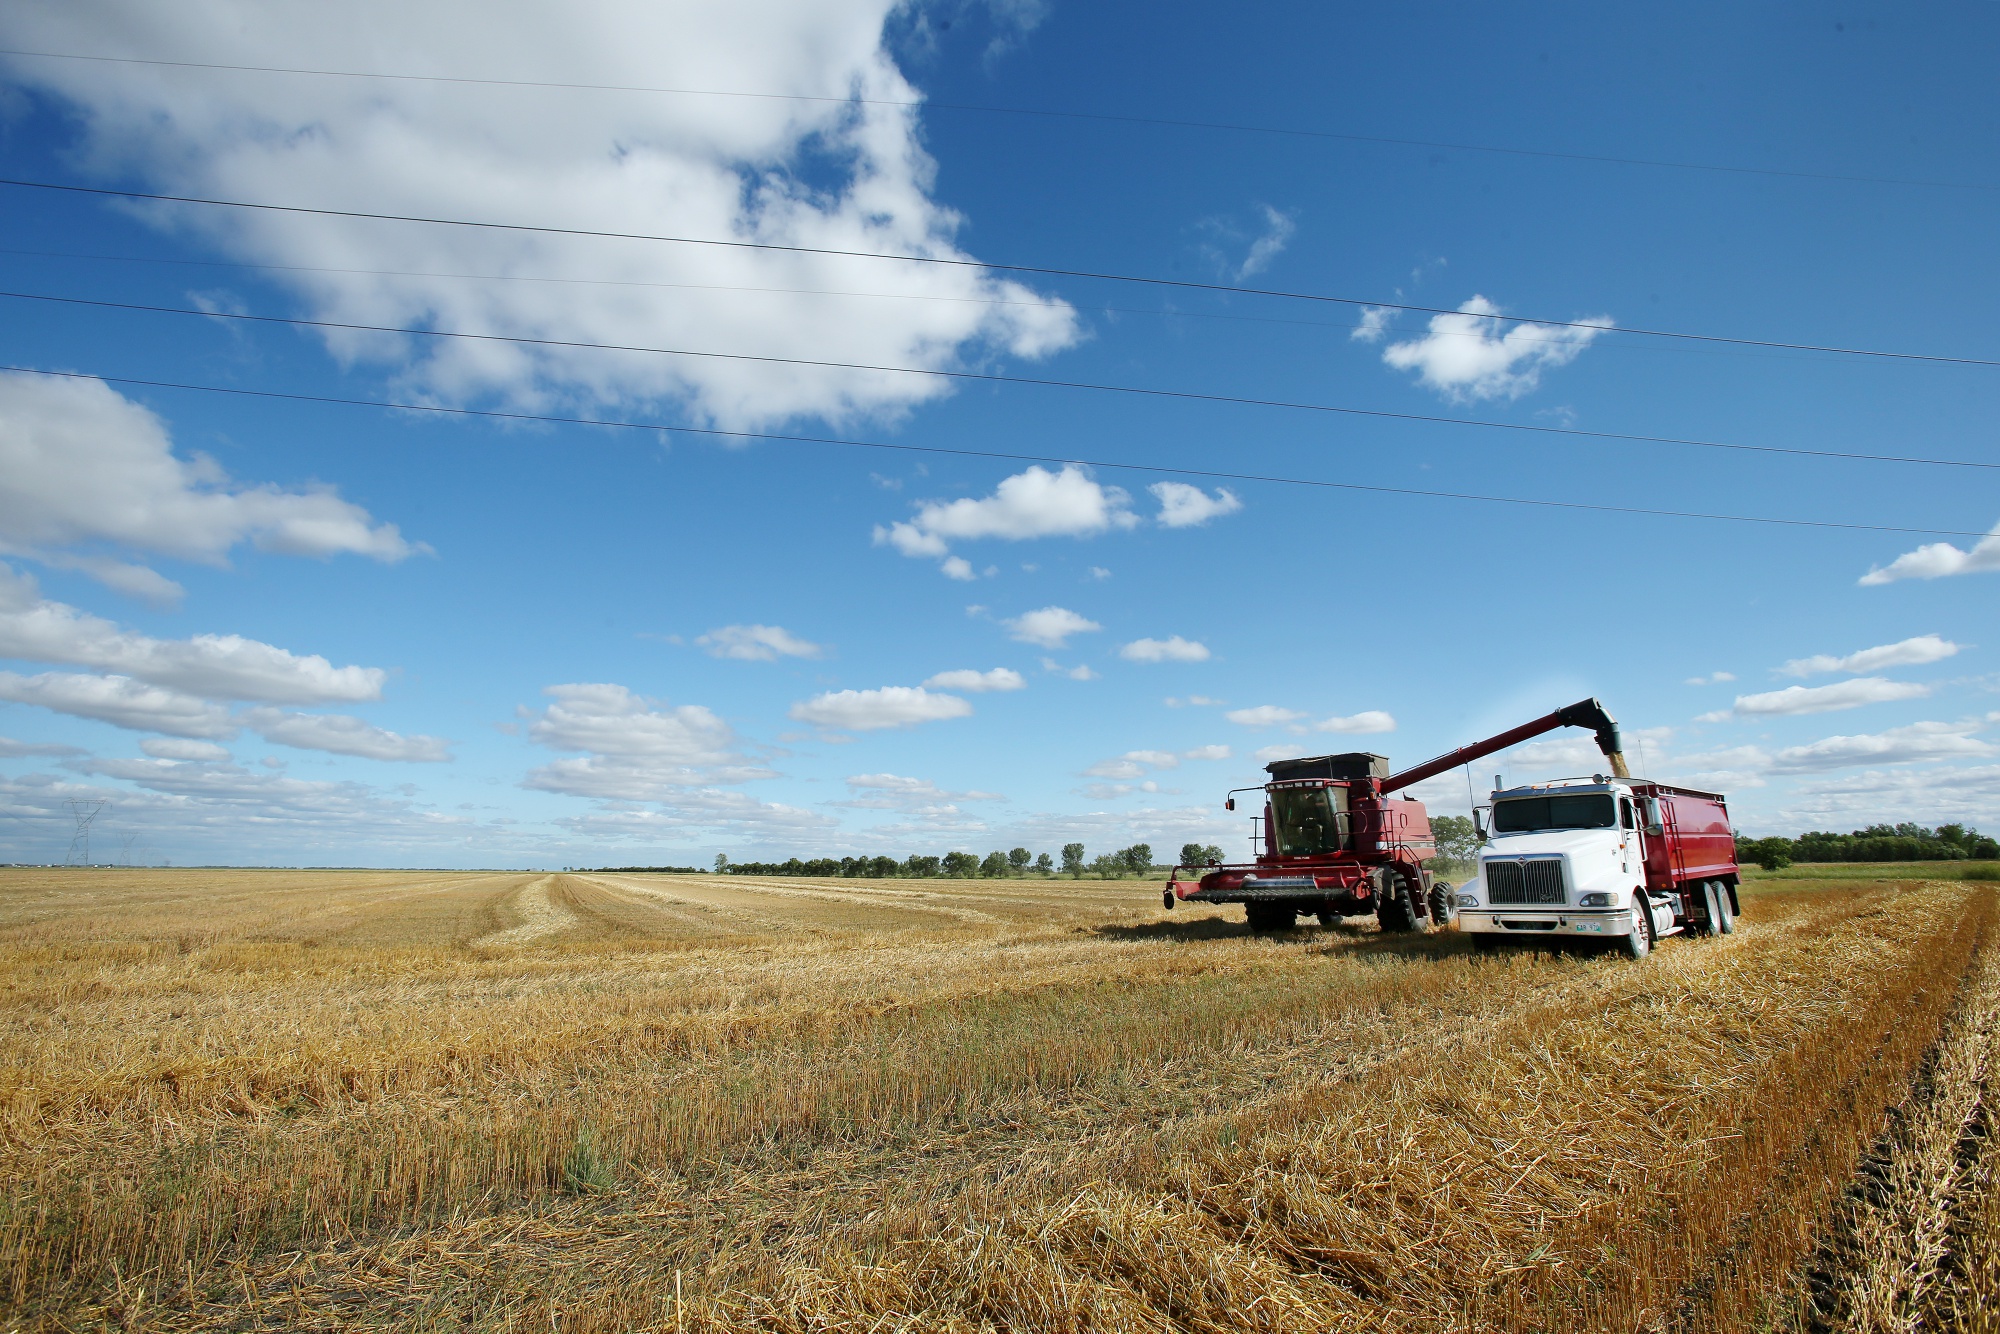 Oats are loaded into a grain truck during harvest at the Qually Farm near Dacotah, Manitoba, Canada.